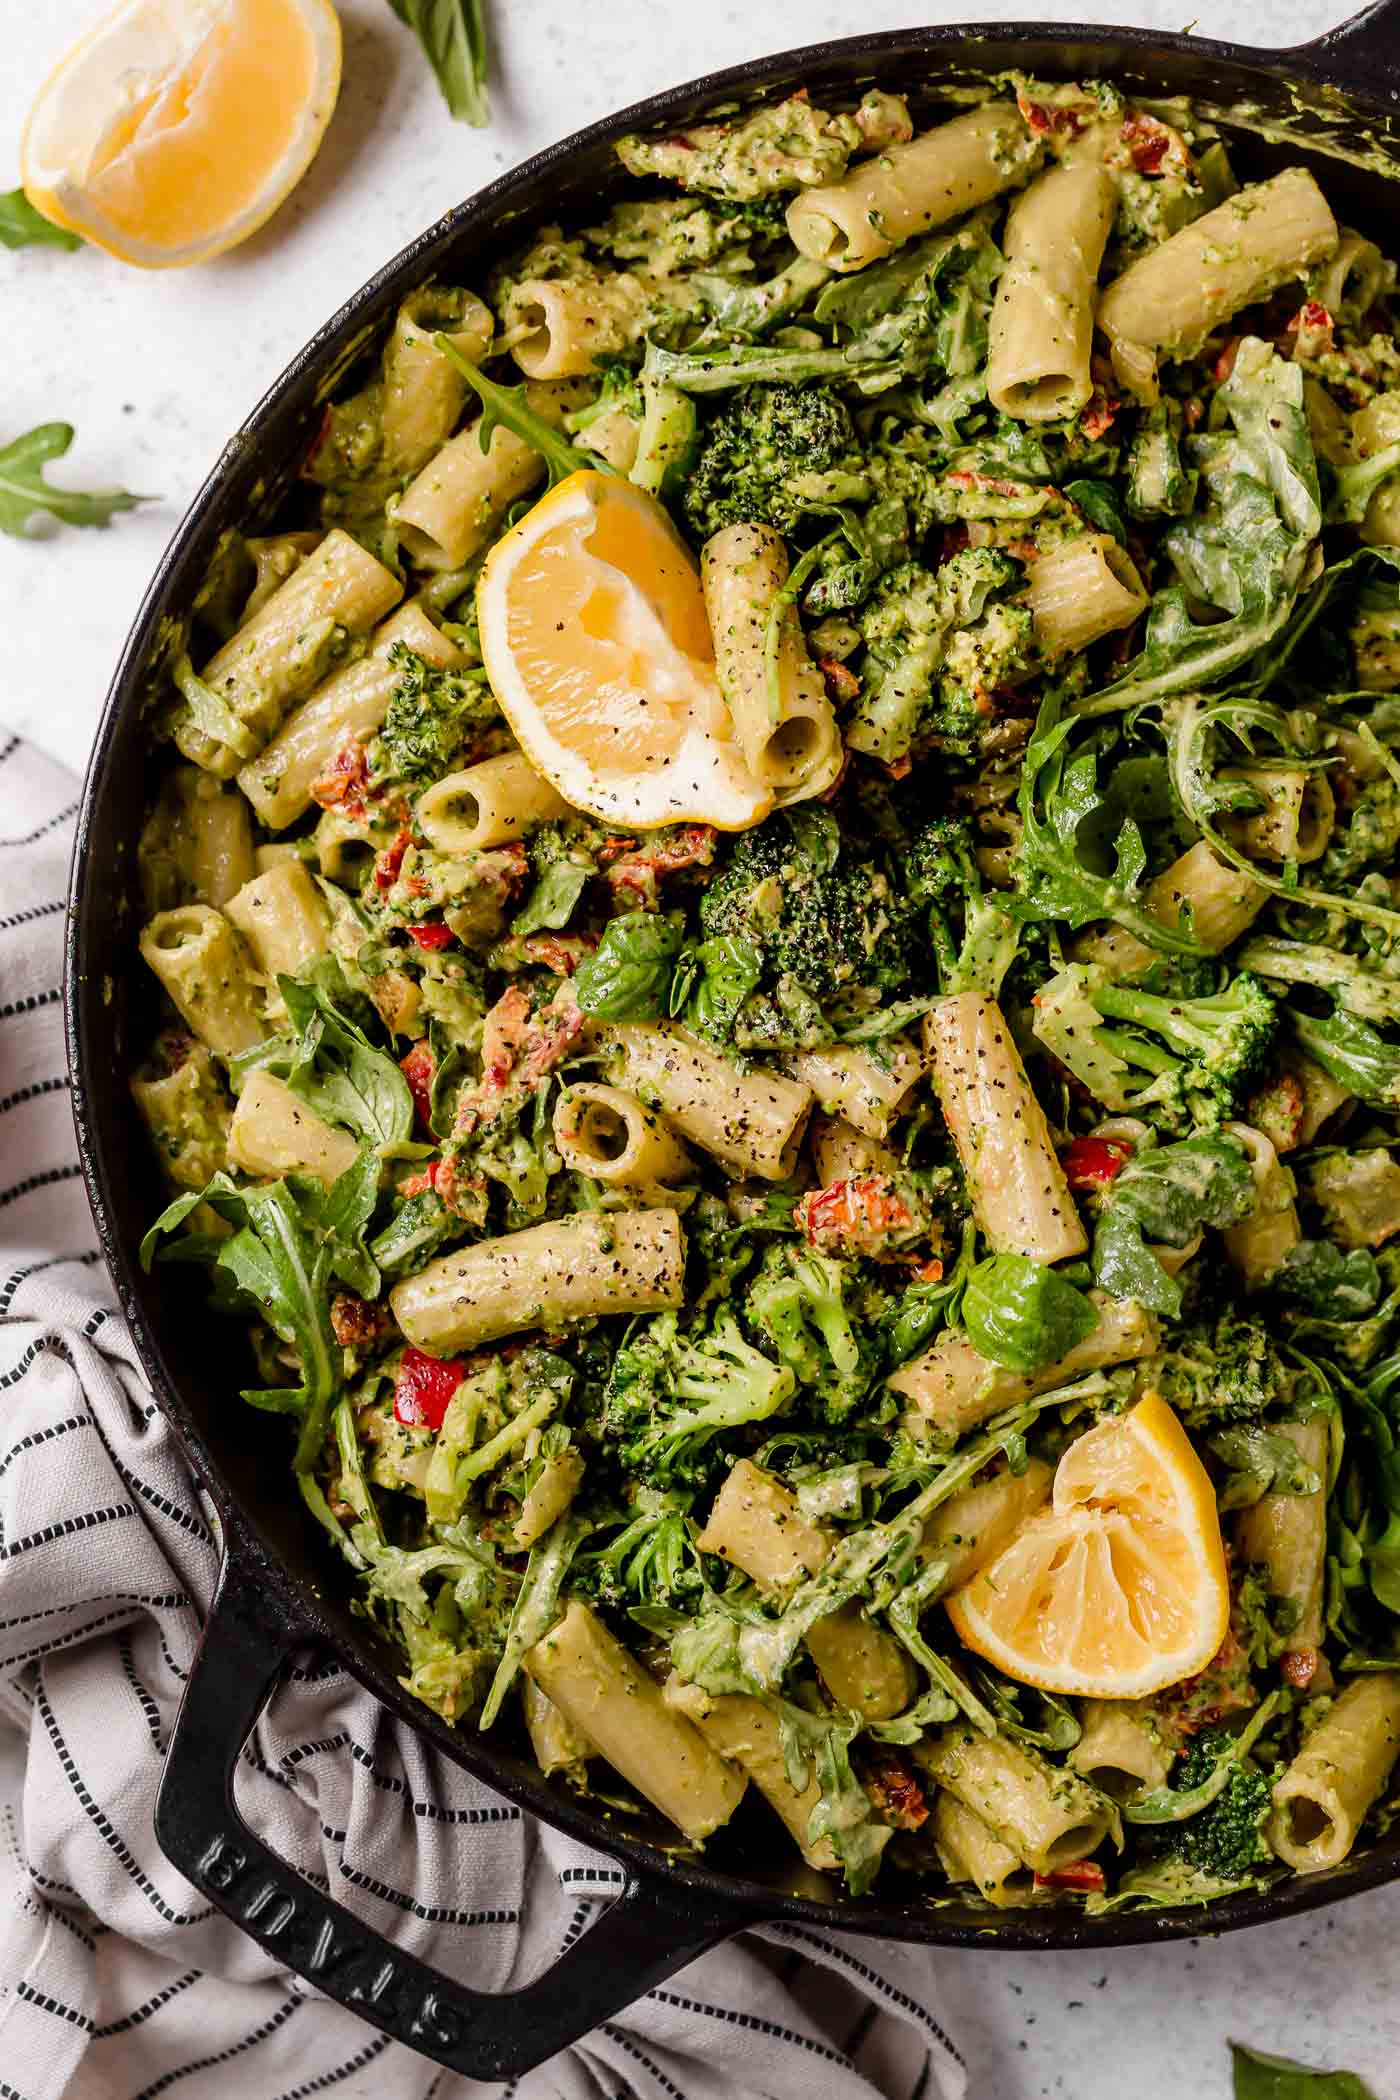 Lemony Basil Creamy Vegan Pasta 25 Minute Dinner Recipe Plays Well With Butter